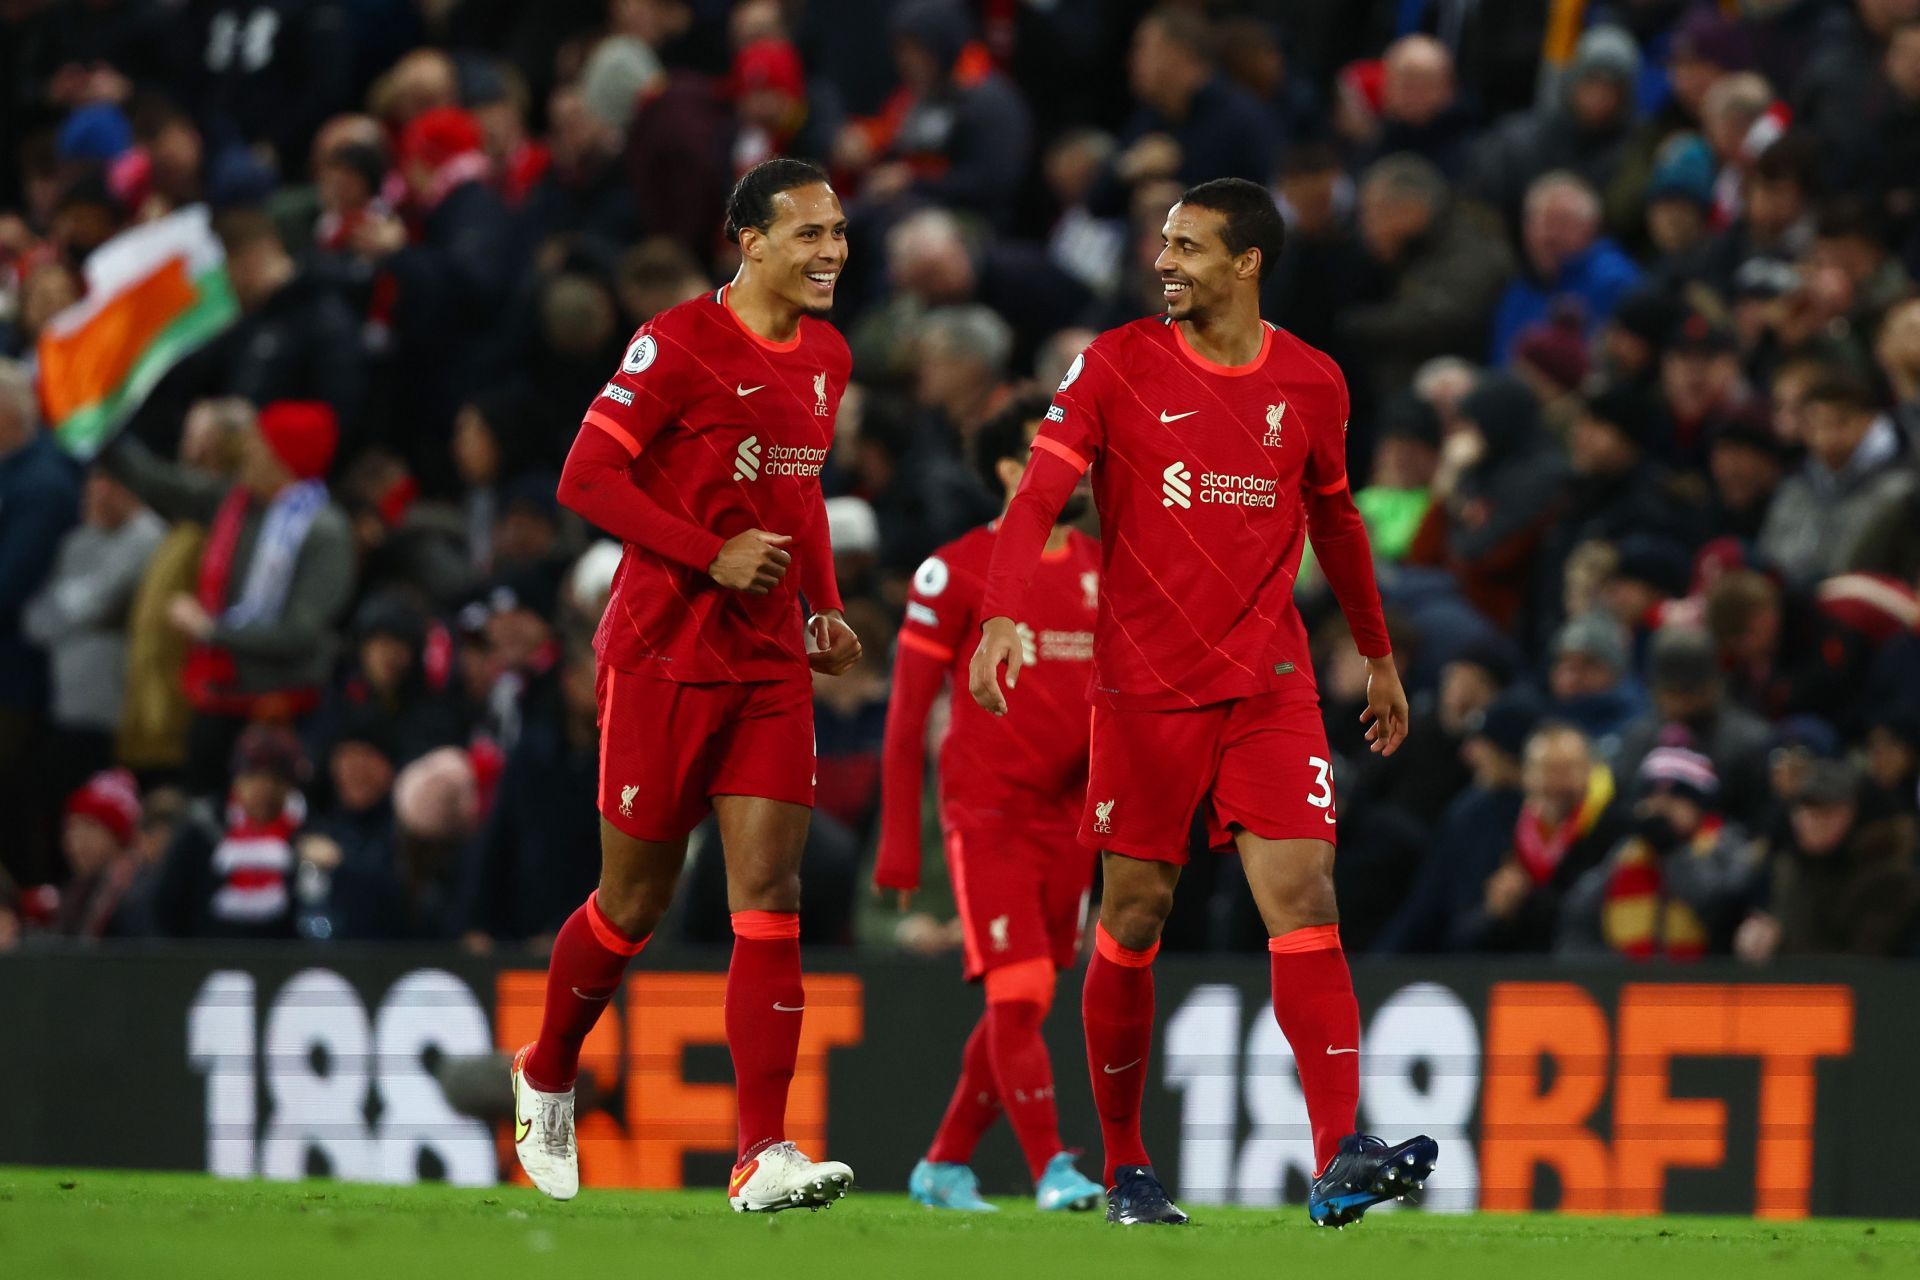 Matip would want to extend his stay at the Reds, ensuring a longer partnership with Virgil van Dijk